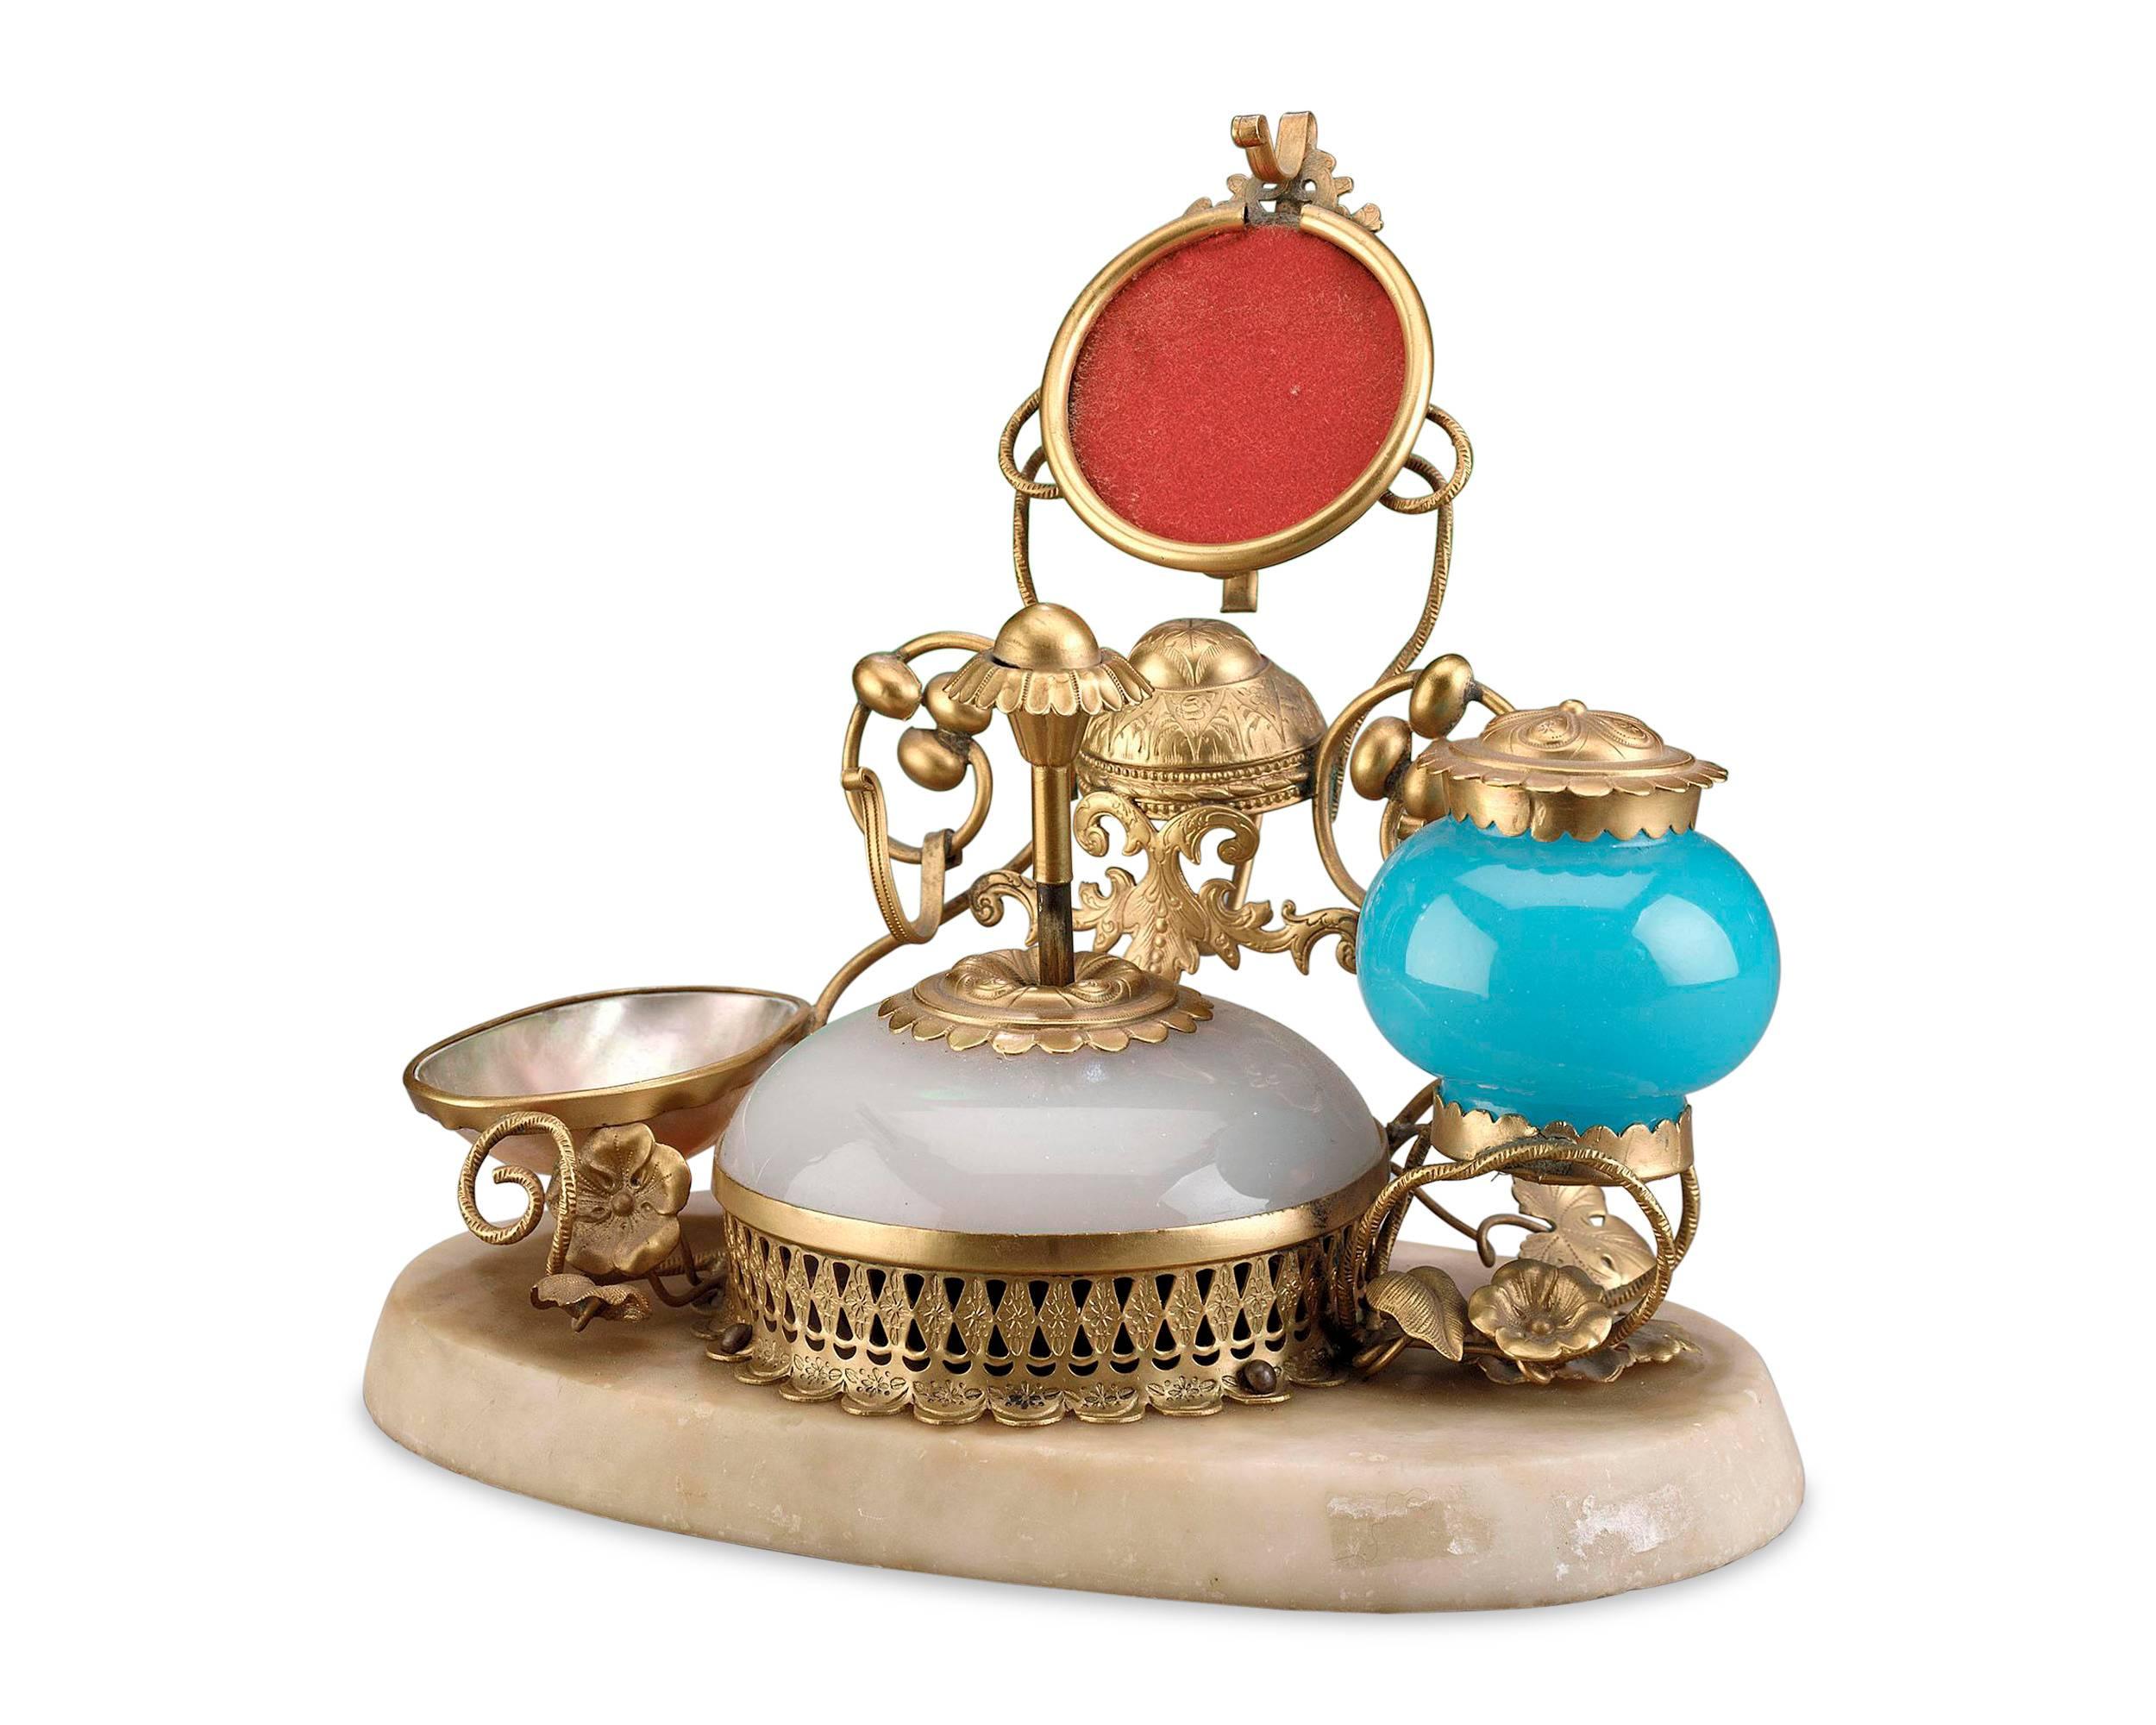 This superb opaline glass perfume set is wonderfully equipped with a bell push and inkwell set in doré bronze and mounted on a marble base. Excellent condition, circa 1860.